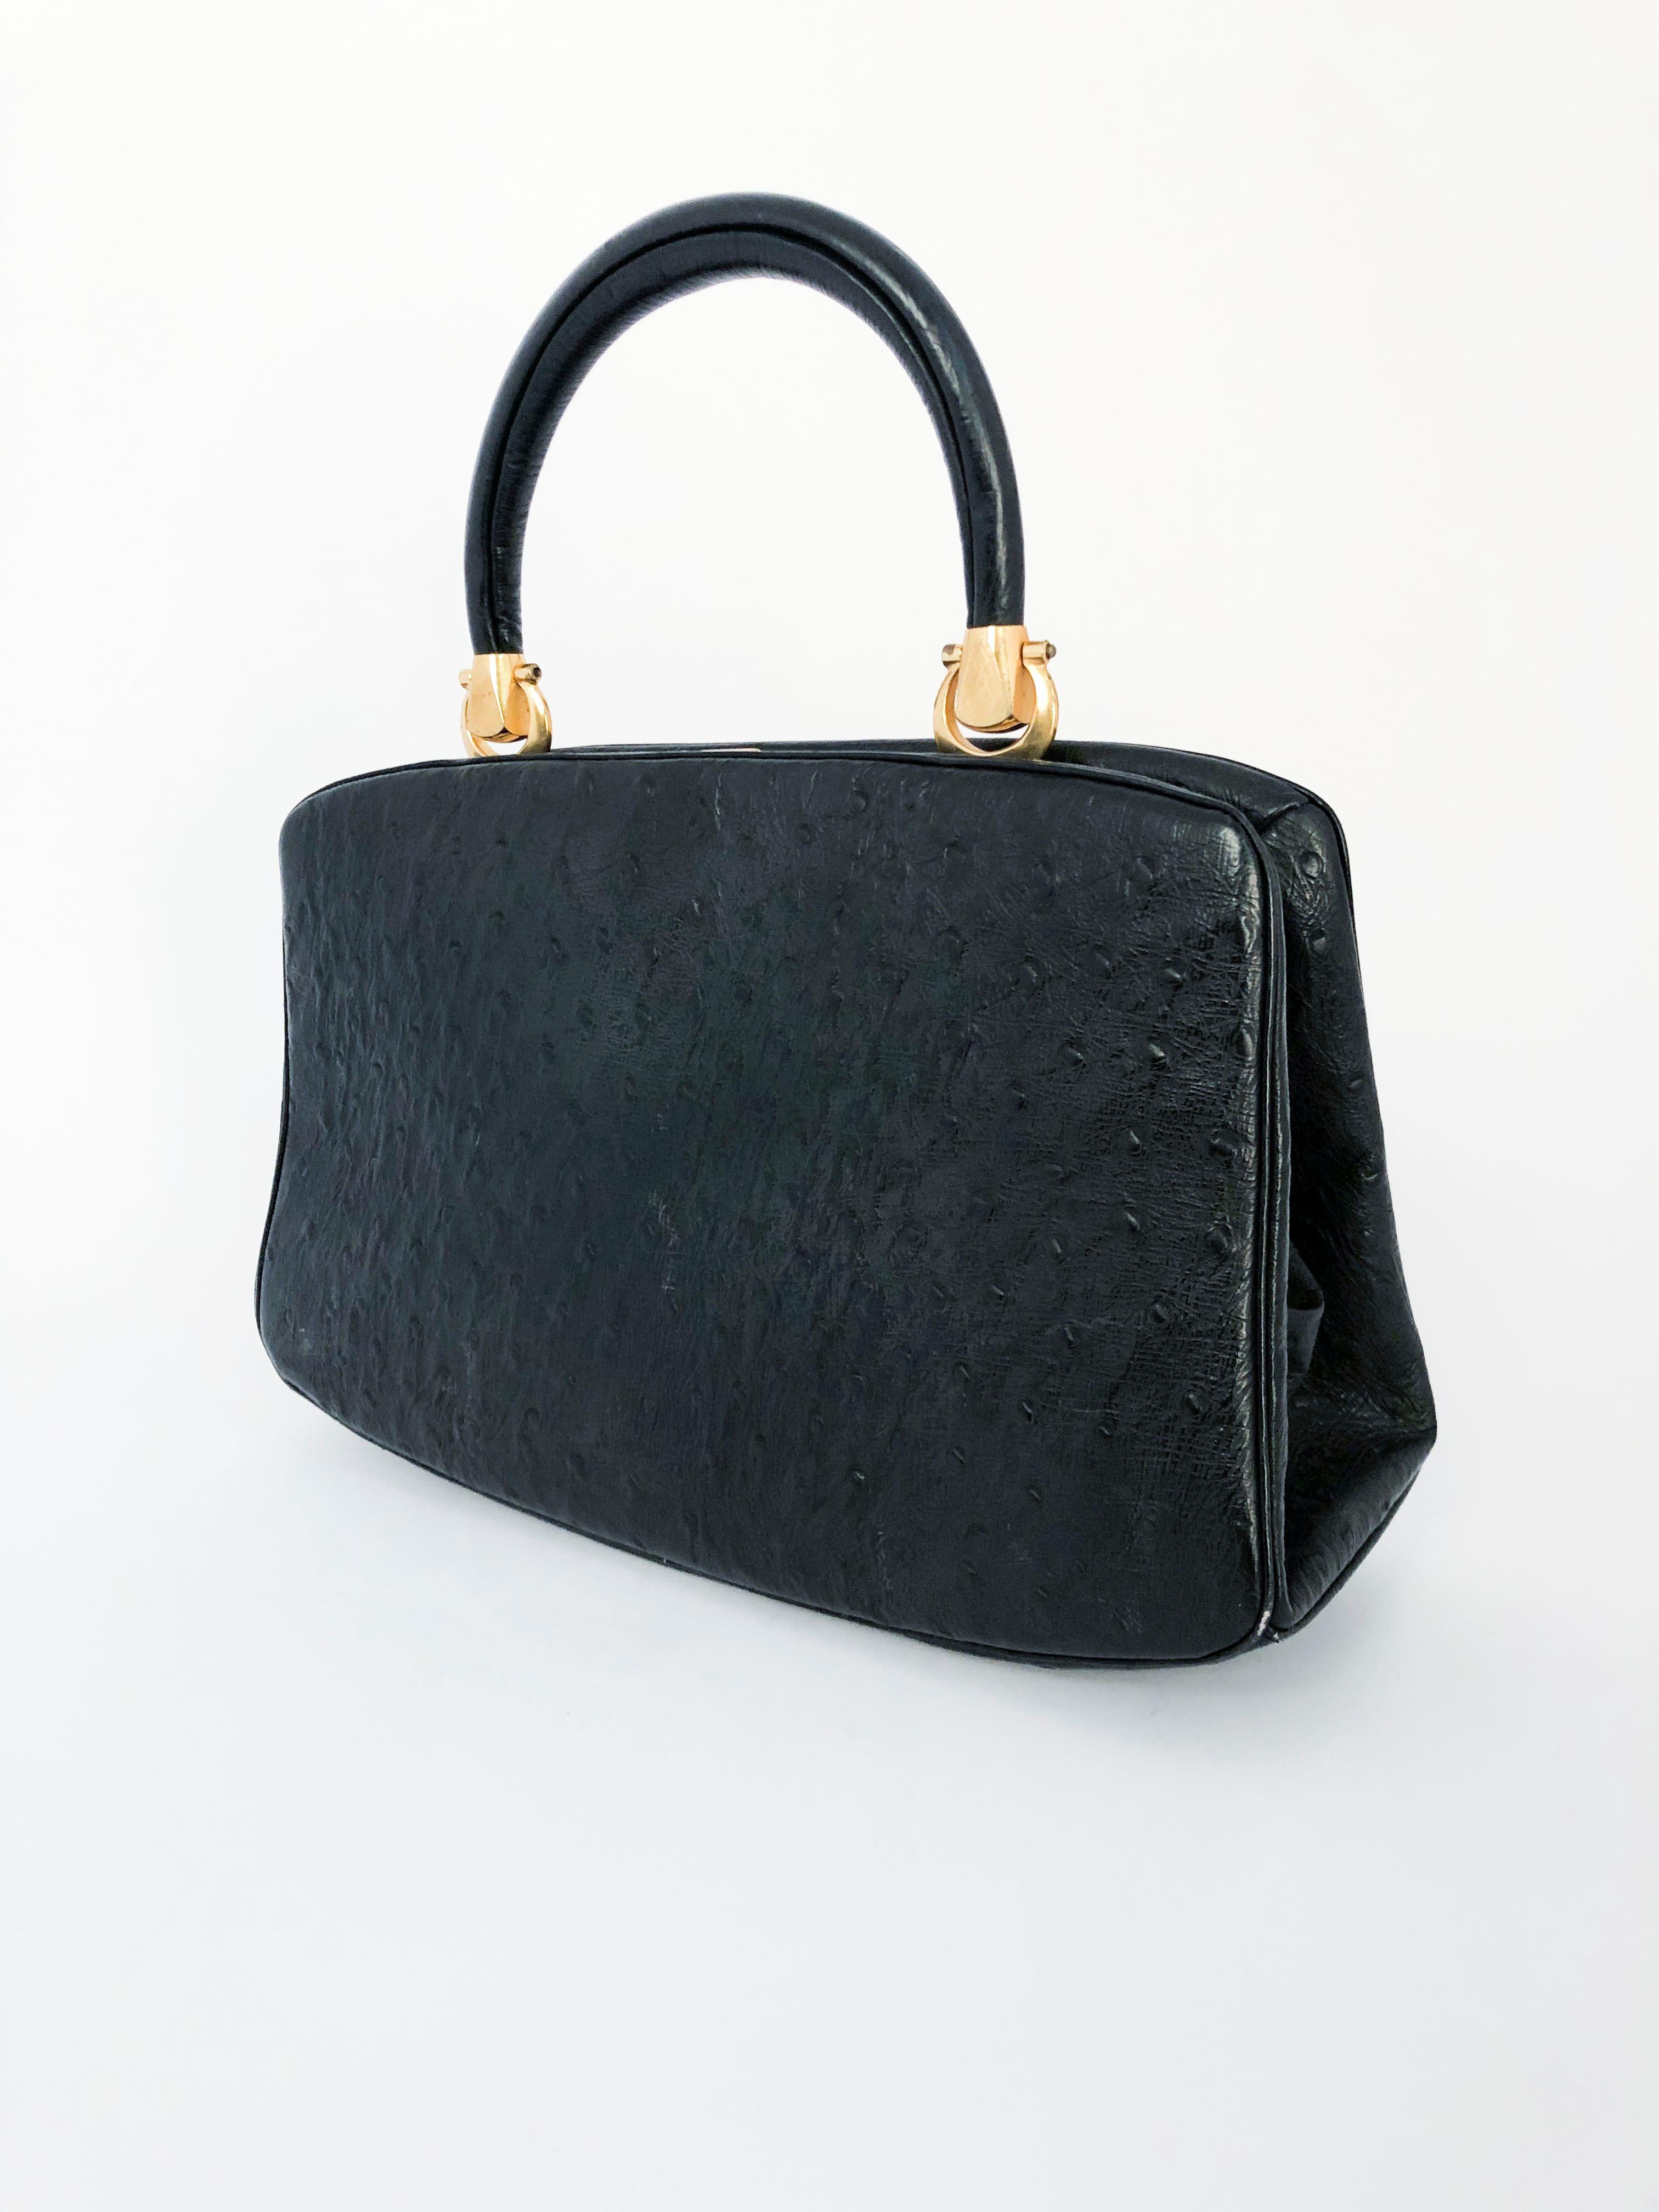 1960s black embossed leather with ostrich texture, articulating handle, and solid brass hardware.